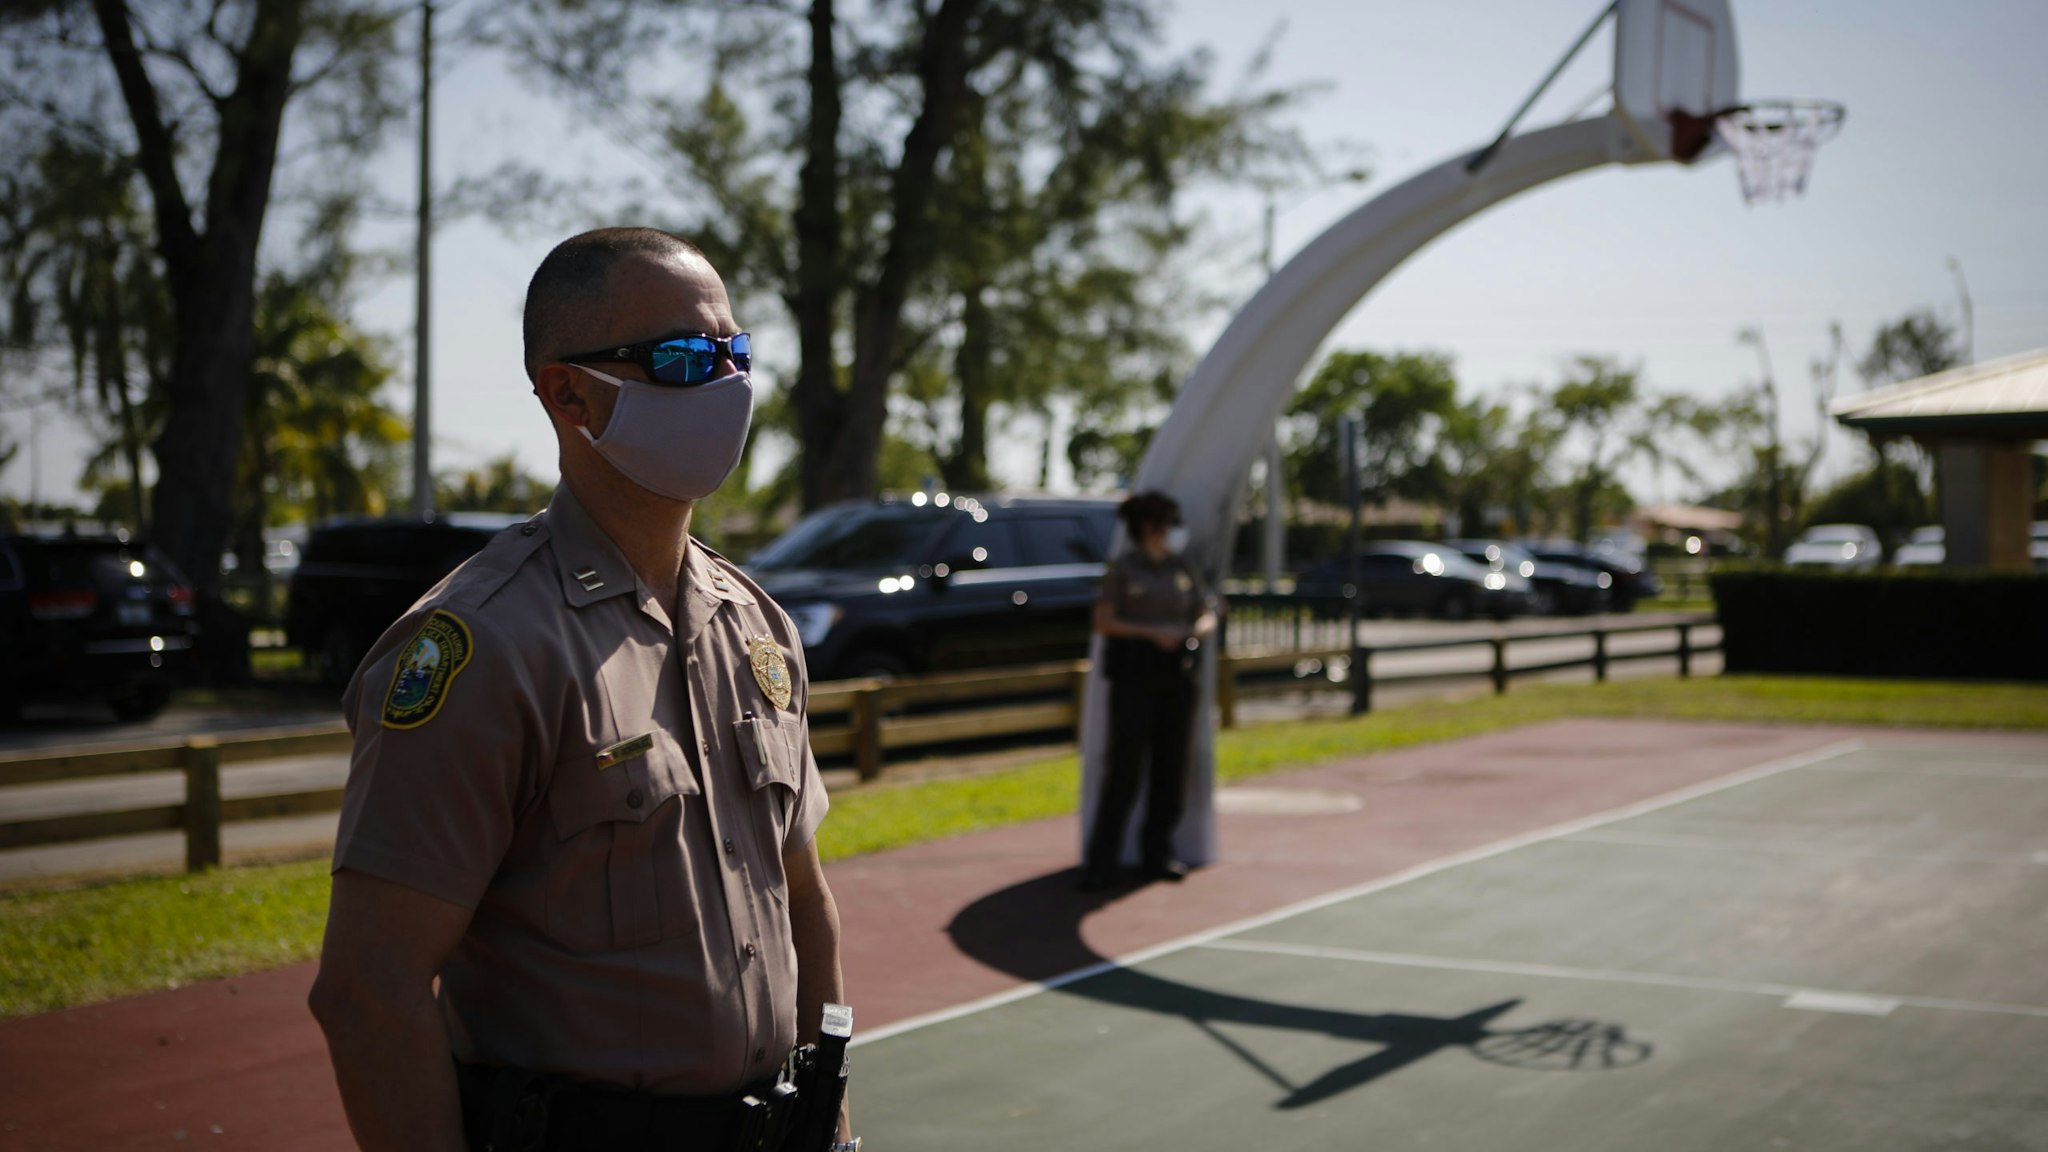 A police officer wears a protective mask while listening to Carlos Gimenez, mayor of Miami-Dade County, not pictured, speak during a news conference in Miami, Florida, U.S., on Monday, April 27, 2020. On Wednesday Miami-Dade's six-week closure order for parks will officially end, replaced by a new set of rules aimed at limiting close encounters during the coronavirus pandemic, according to the Miami Herald. Photographer: Eva Marie Uzcategui/Bloomberg via Getty Images